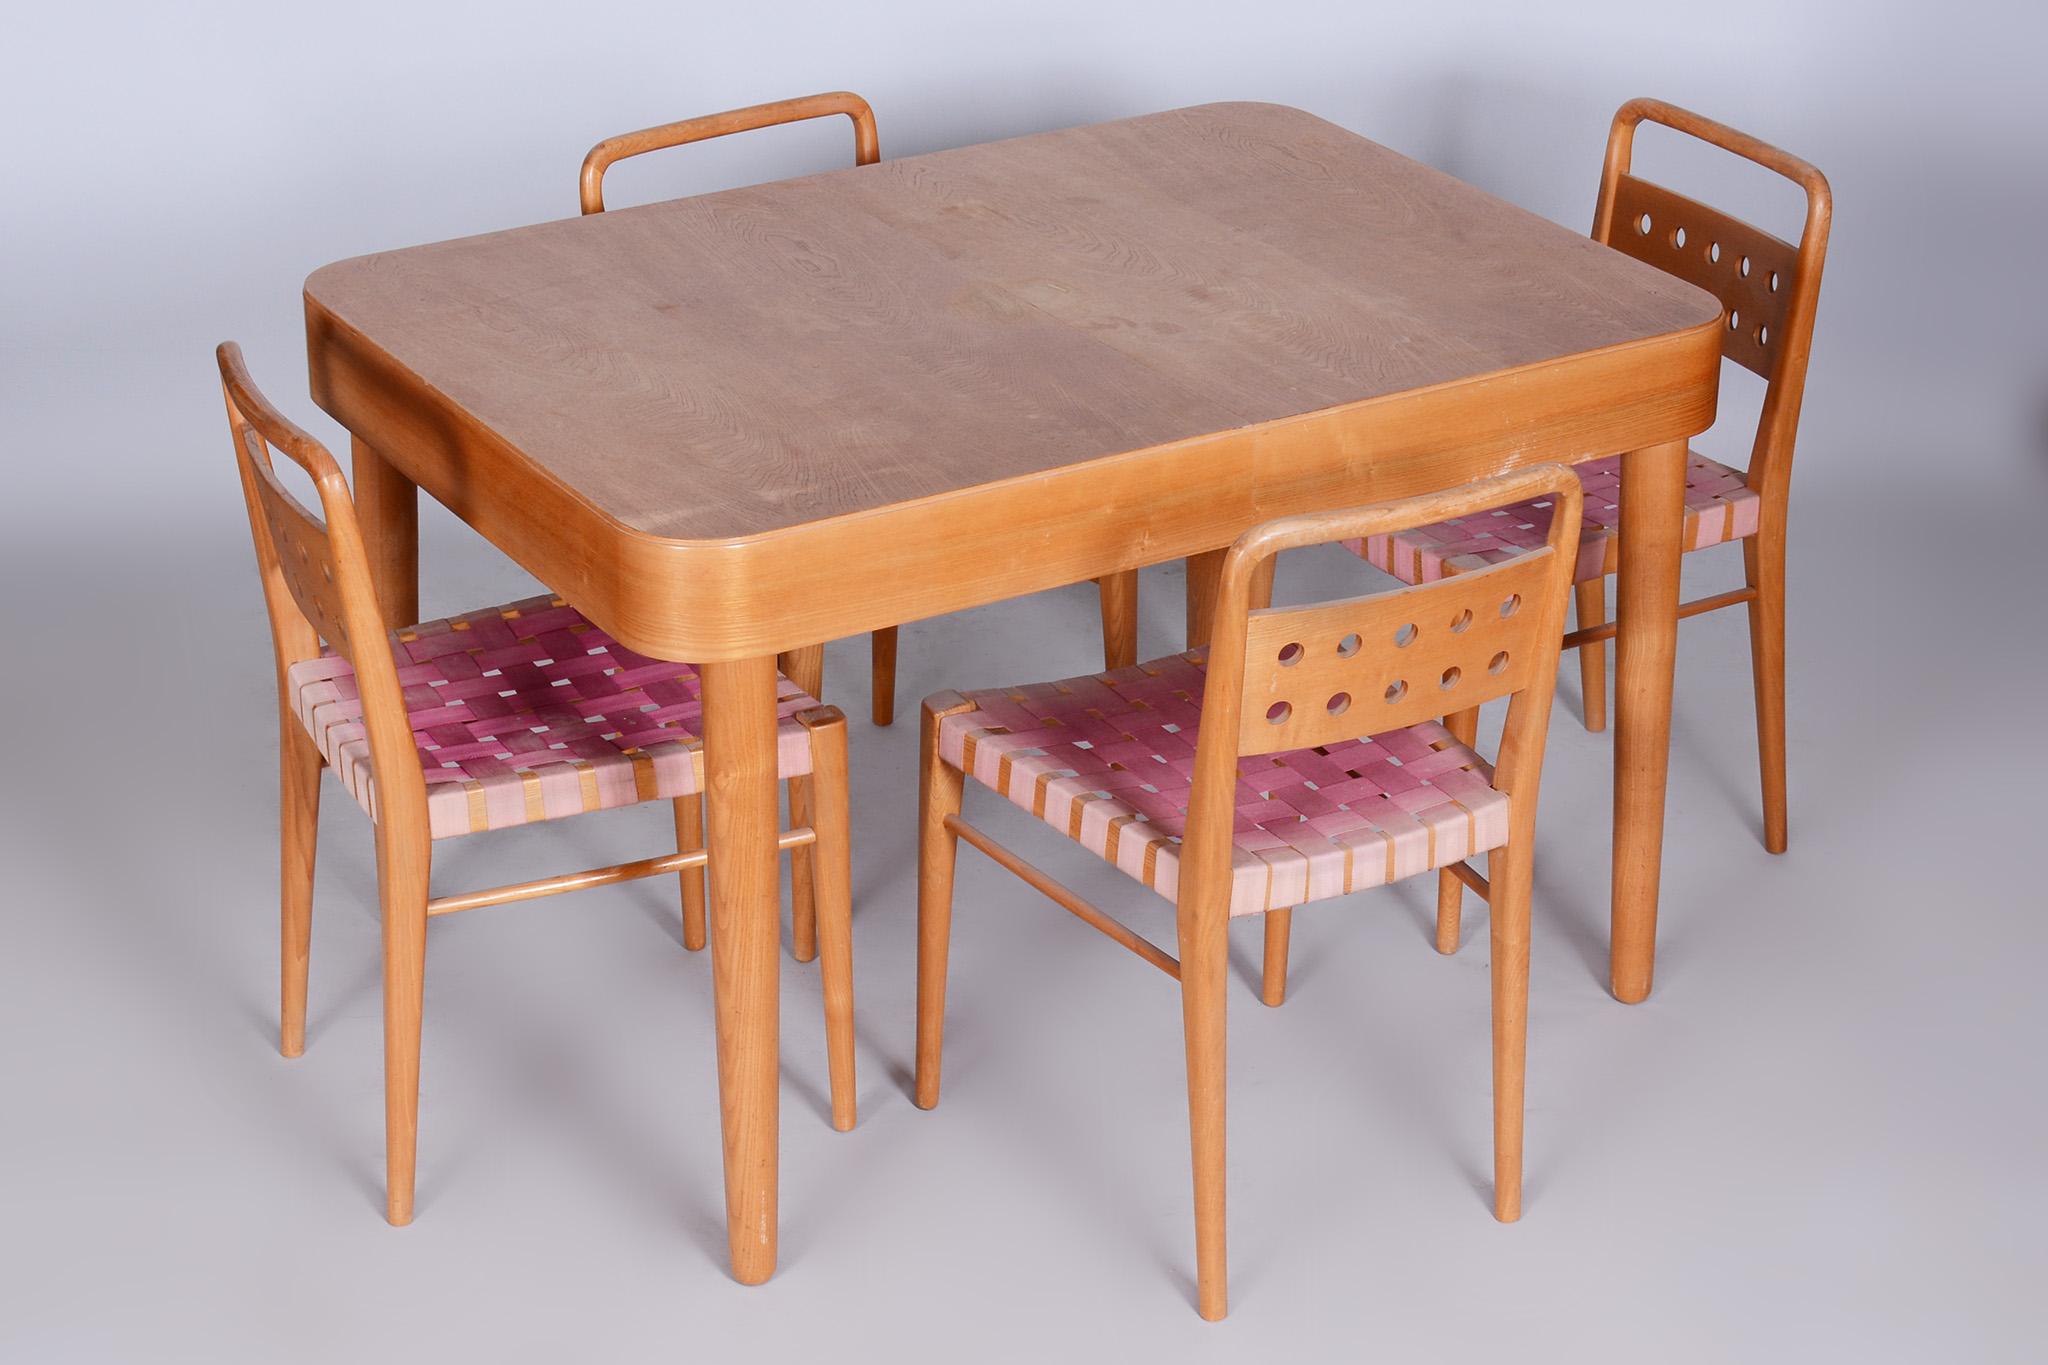 Midcentury Ash Dining Table, Made by Uluv, Revived Polish, Czechia, 1950s For Sale 6